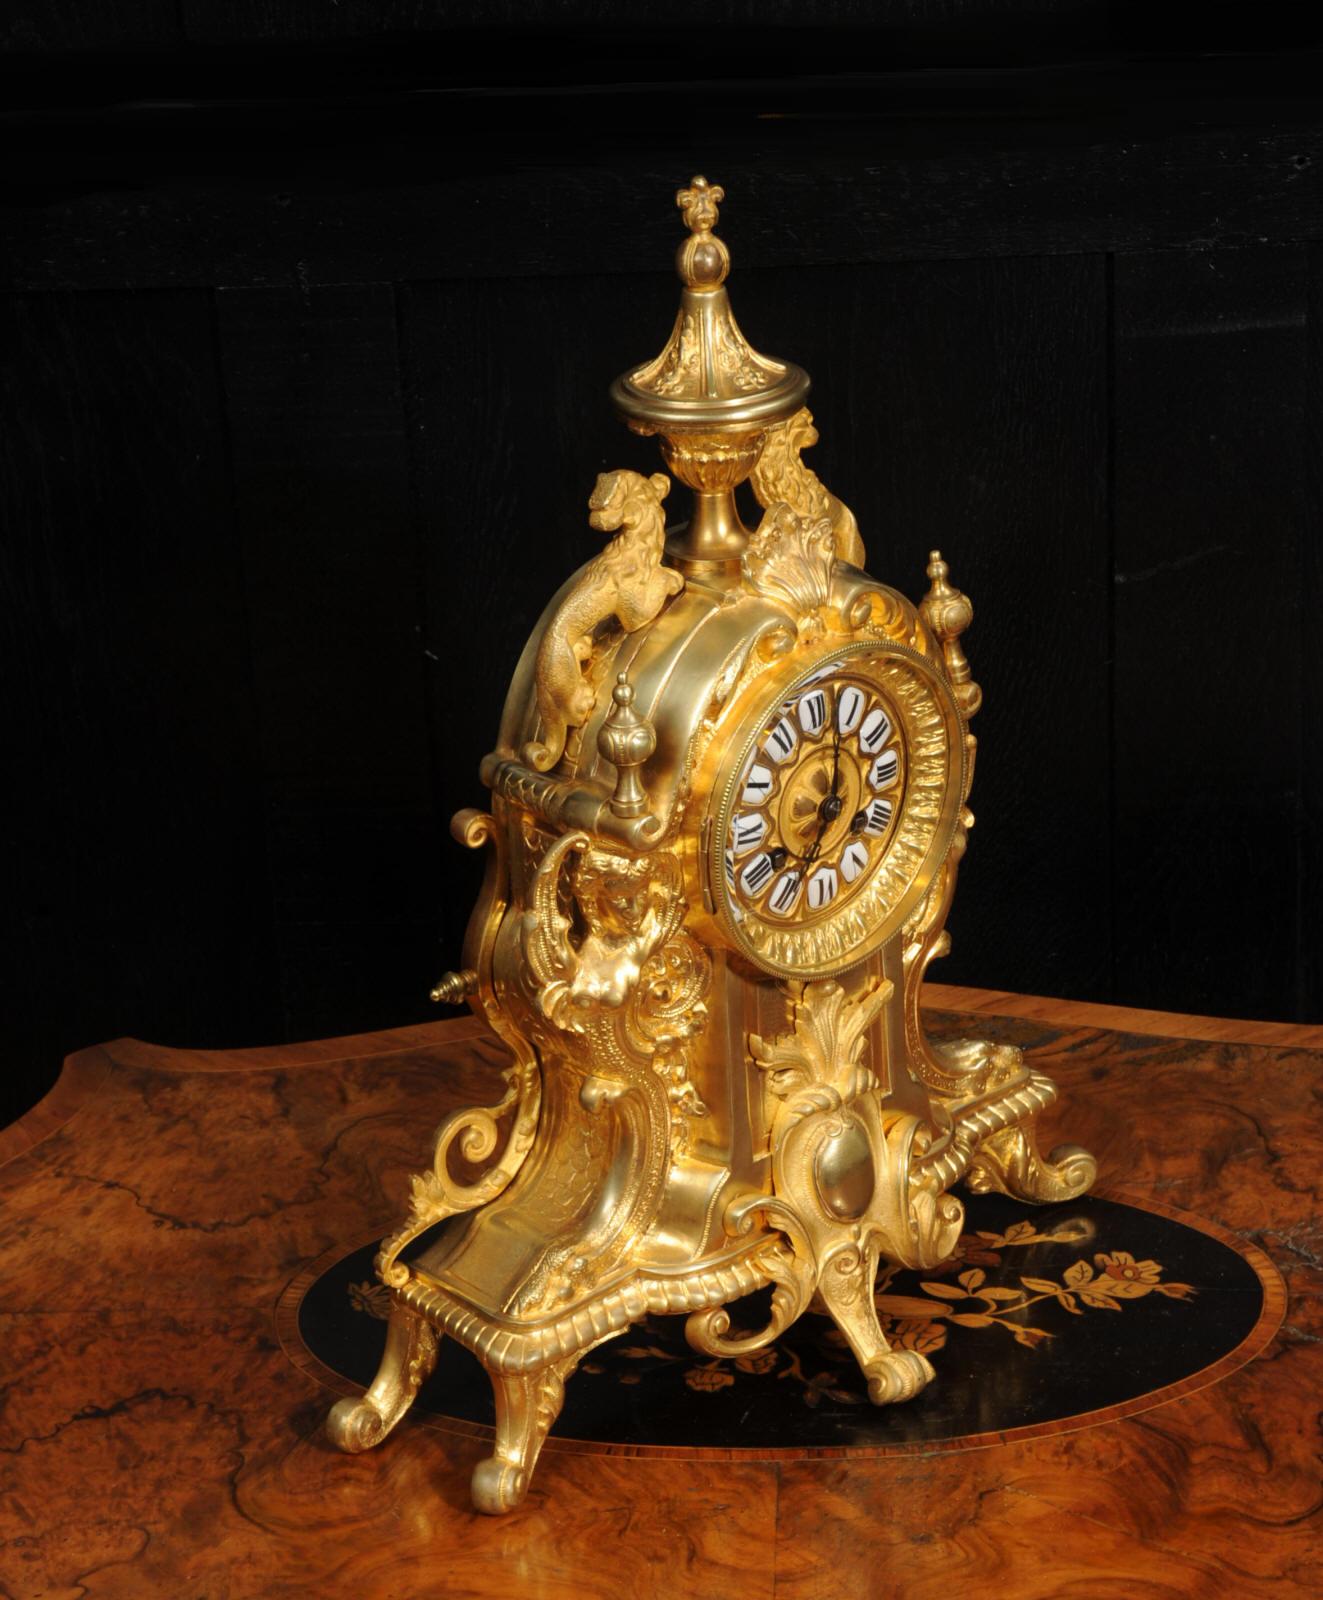 Antique French Ormolu Clock - Lions Rampant - overhauled and tested For Sale 7